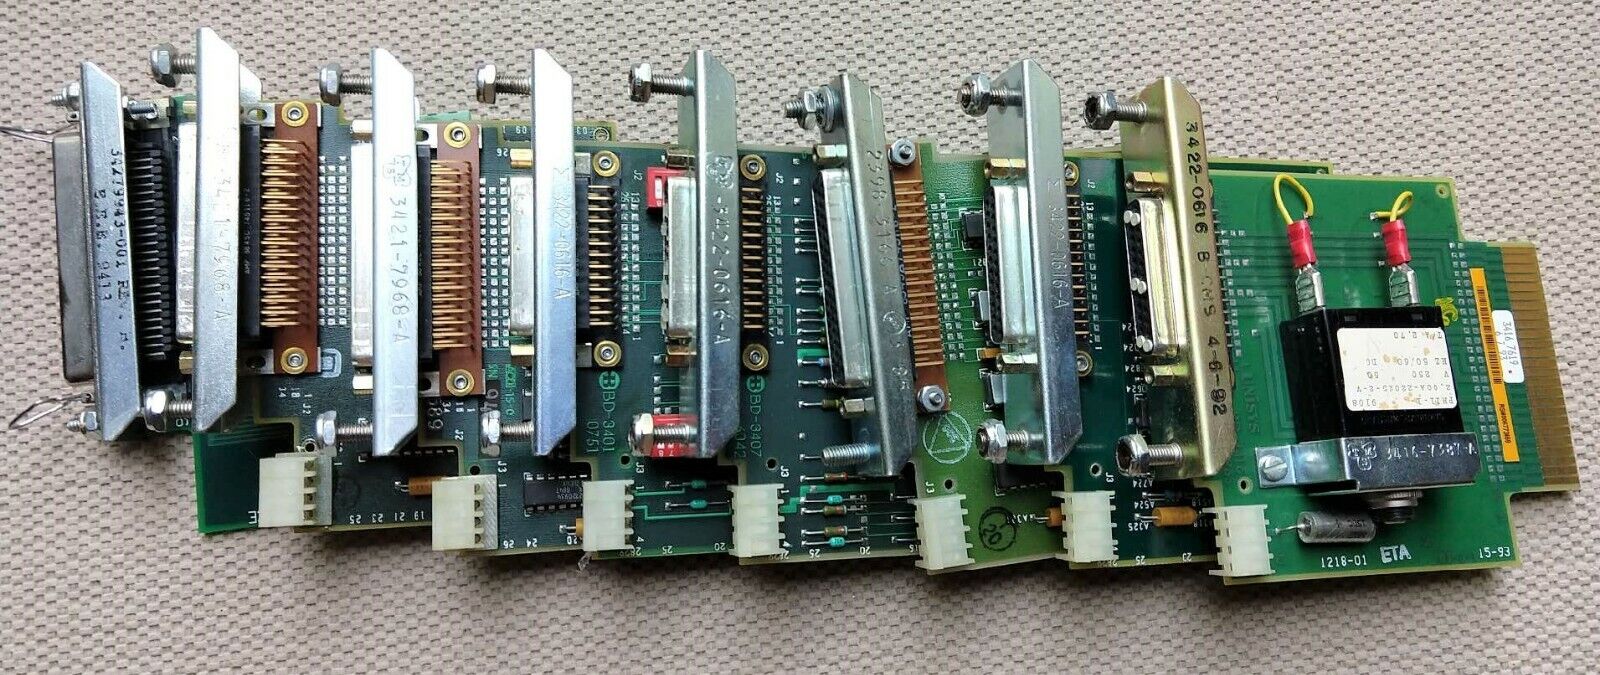 Lot of 8 Vintage Burroughs/Unisys I/O Interface Boards